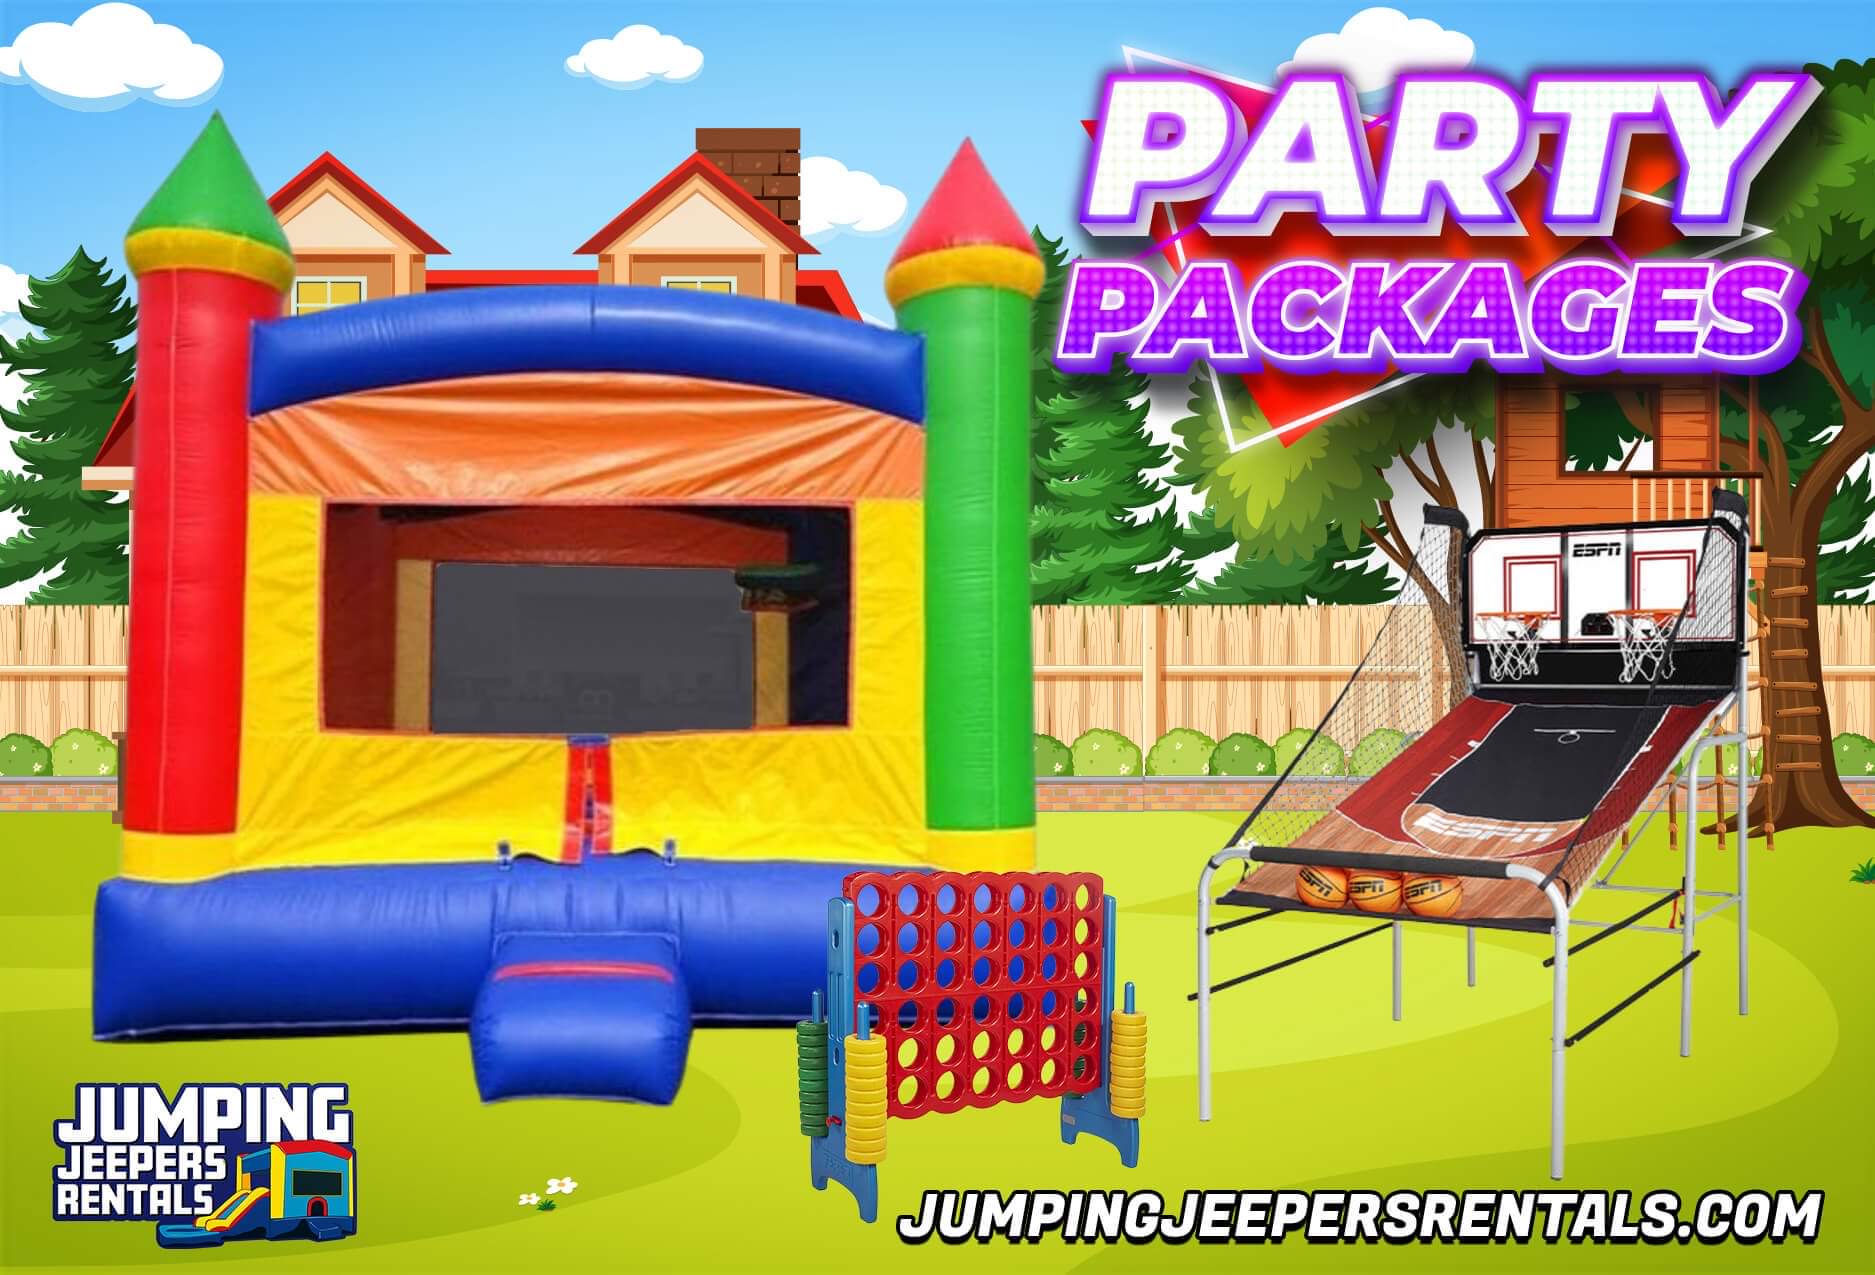 Bounce House Party Packages Rentals Savannah GA